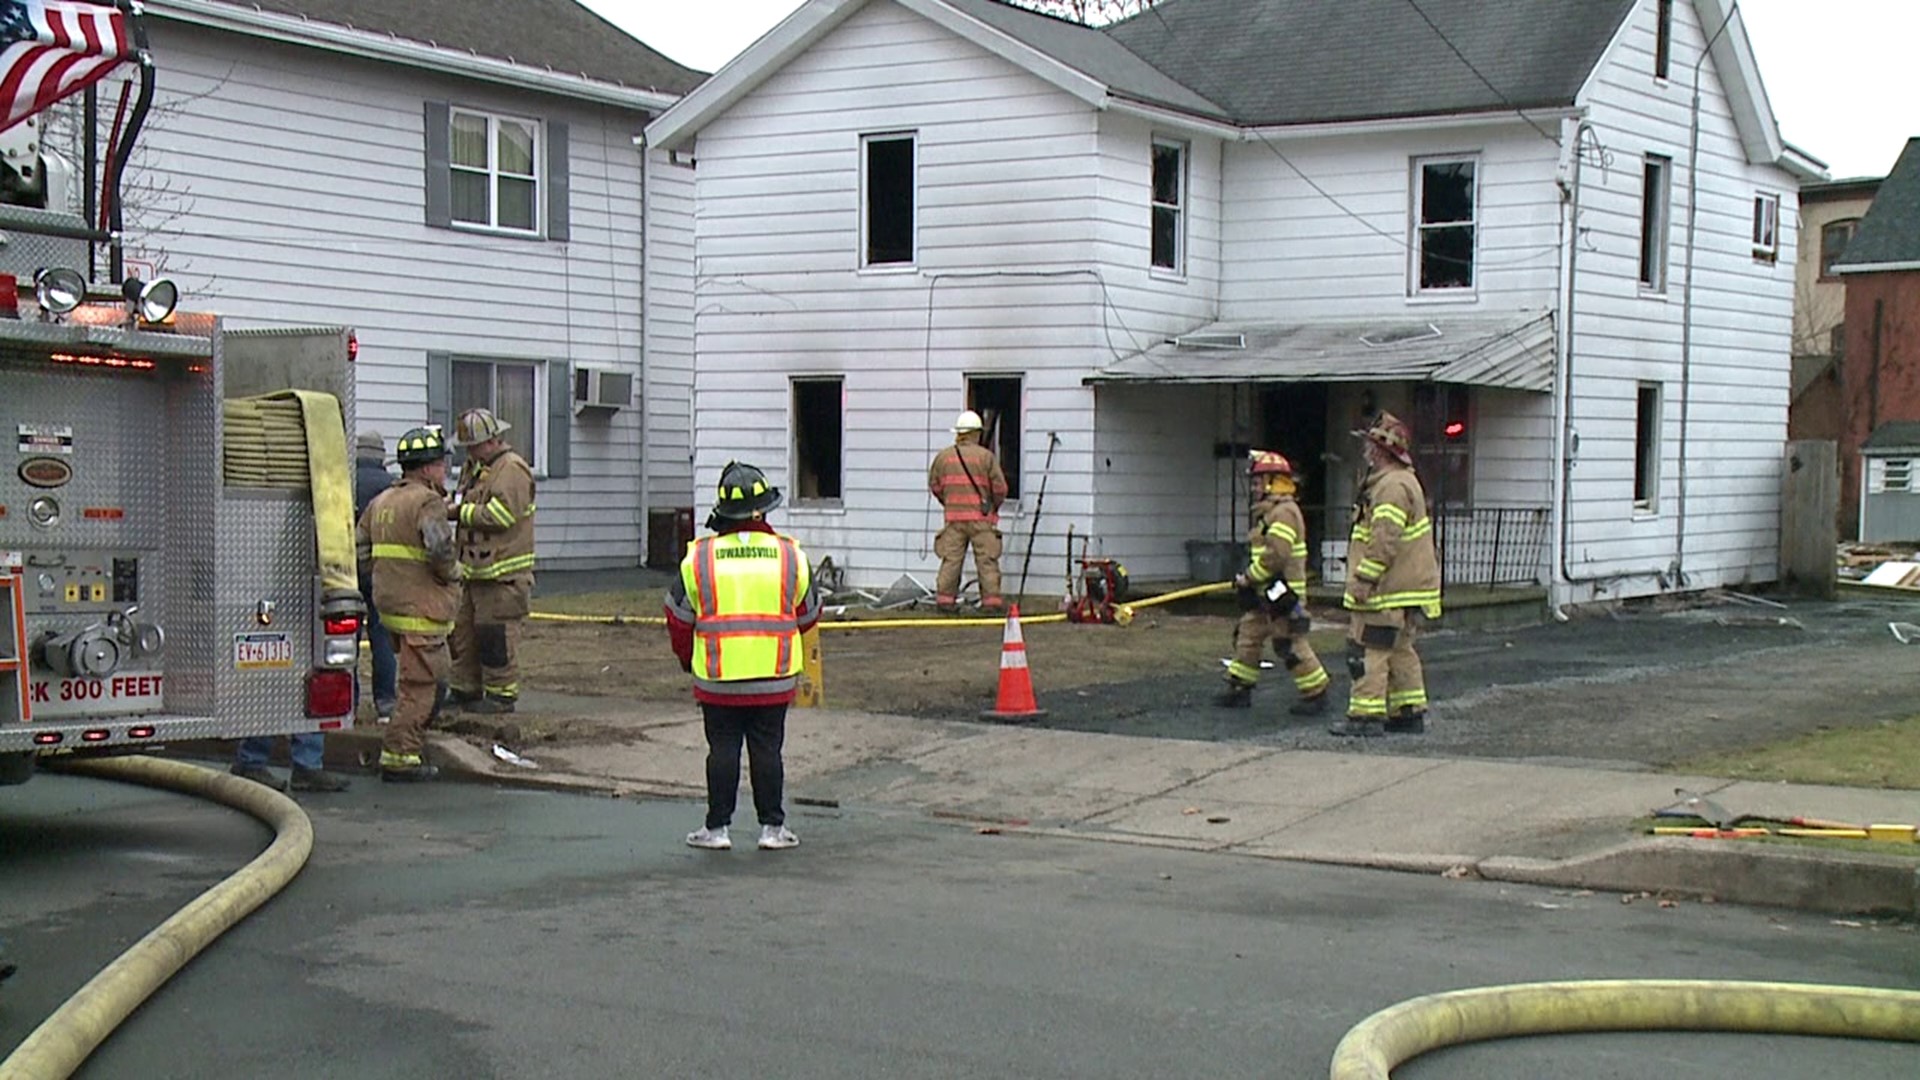 Flames broke out at a vacant house along Page Avenue in the borough just after 3 p.m. Tuesday afternoon.